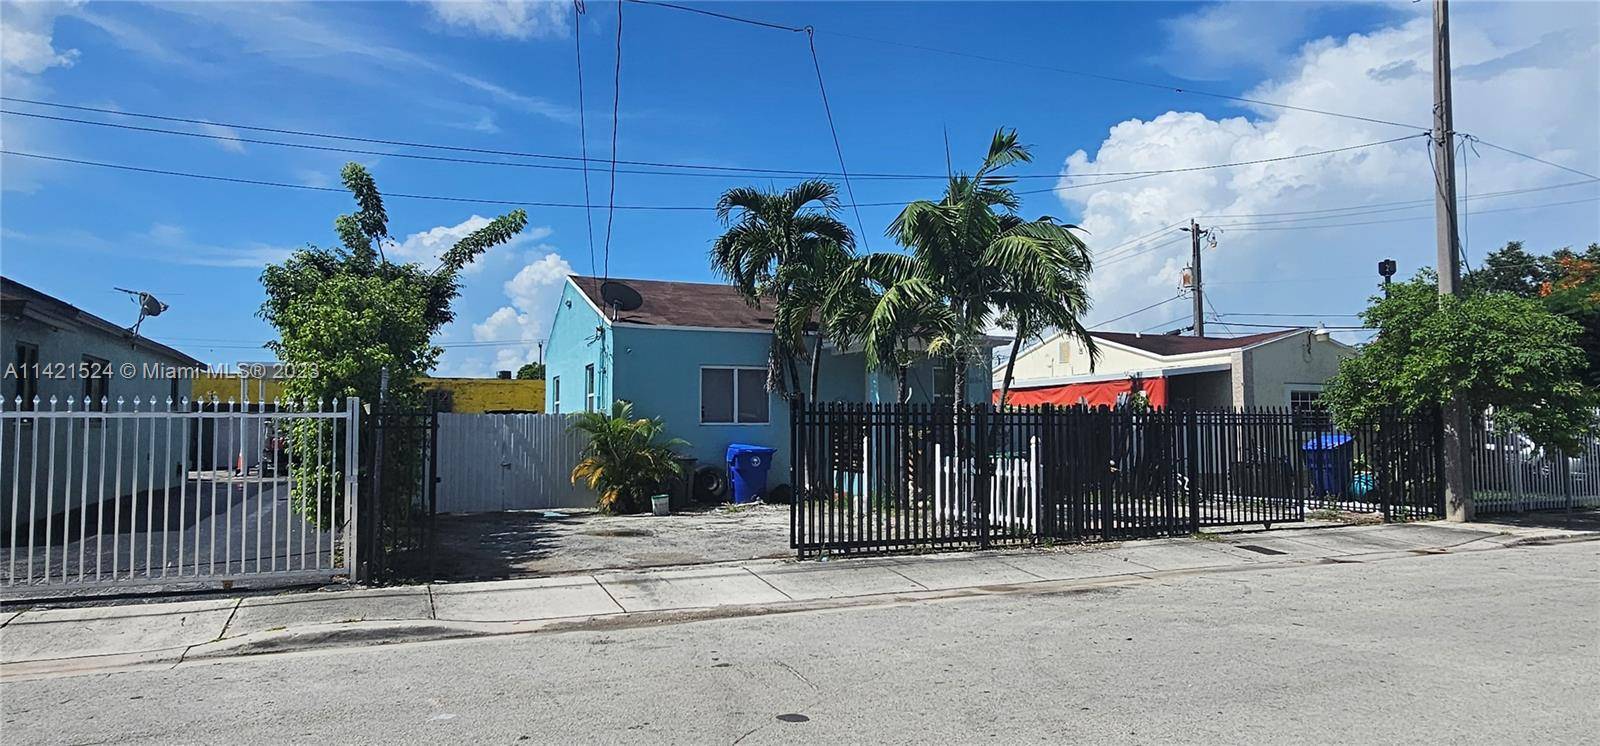 2 BEDROOM 1 BATHROOM RESIDENTIAL SURRENDED BY COMMERCIAL PROPERTIES AND LOCATED JUST A FEW BLOCKS FROM THE MIAMI RIVER, DESINGN DISTRICT, WYNWOOD, DOWNTOWN, MIAMI HOSPITAL, AIRPORT, BEACHES.